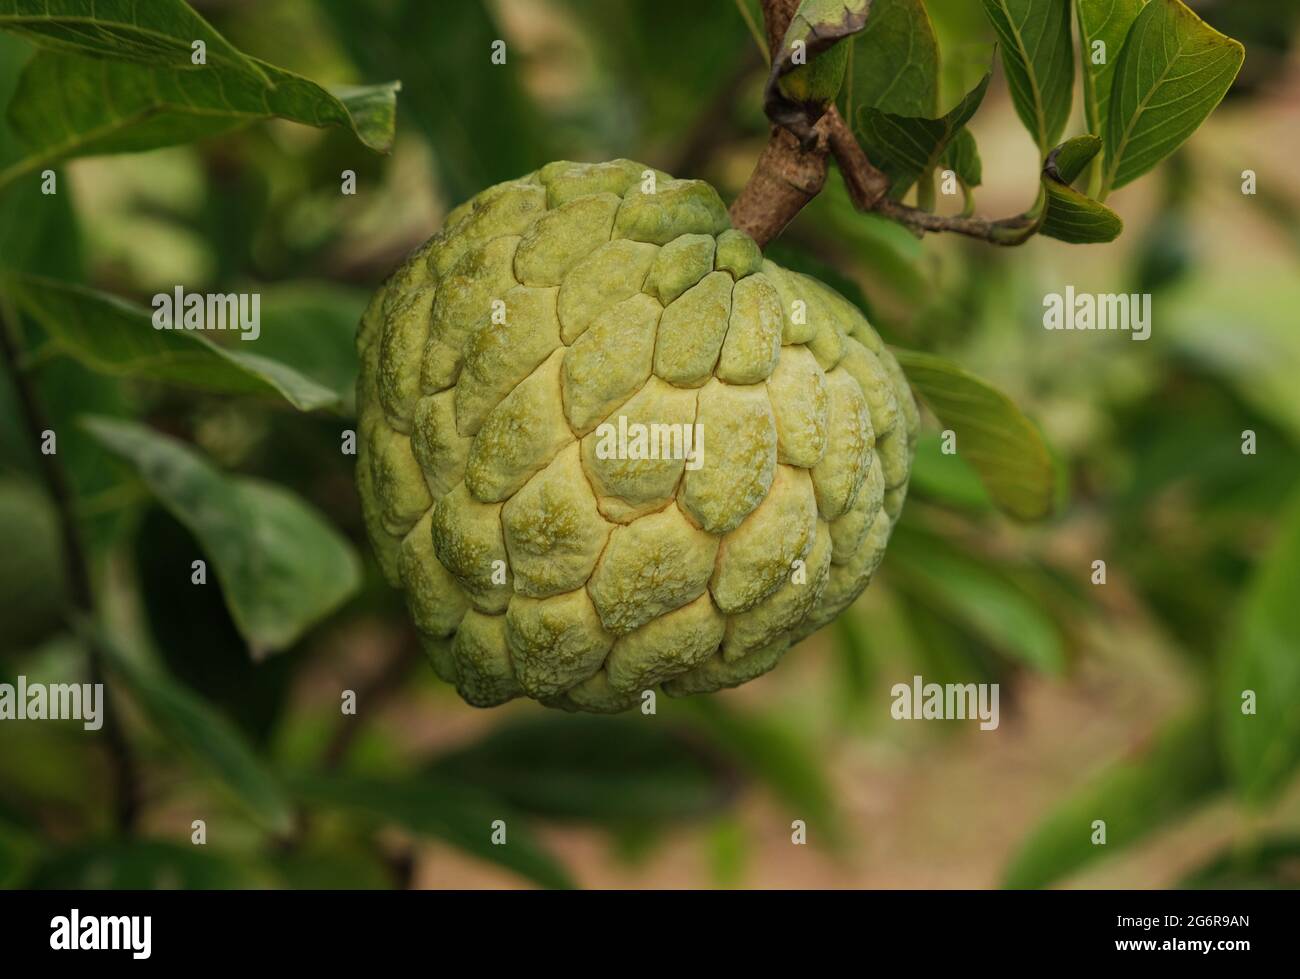 Custard apple (fruit) or Sugar apples on the tree branch in the garden, India. Stock Photo